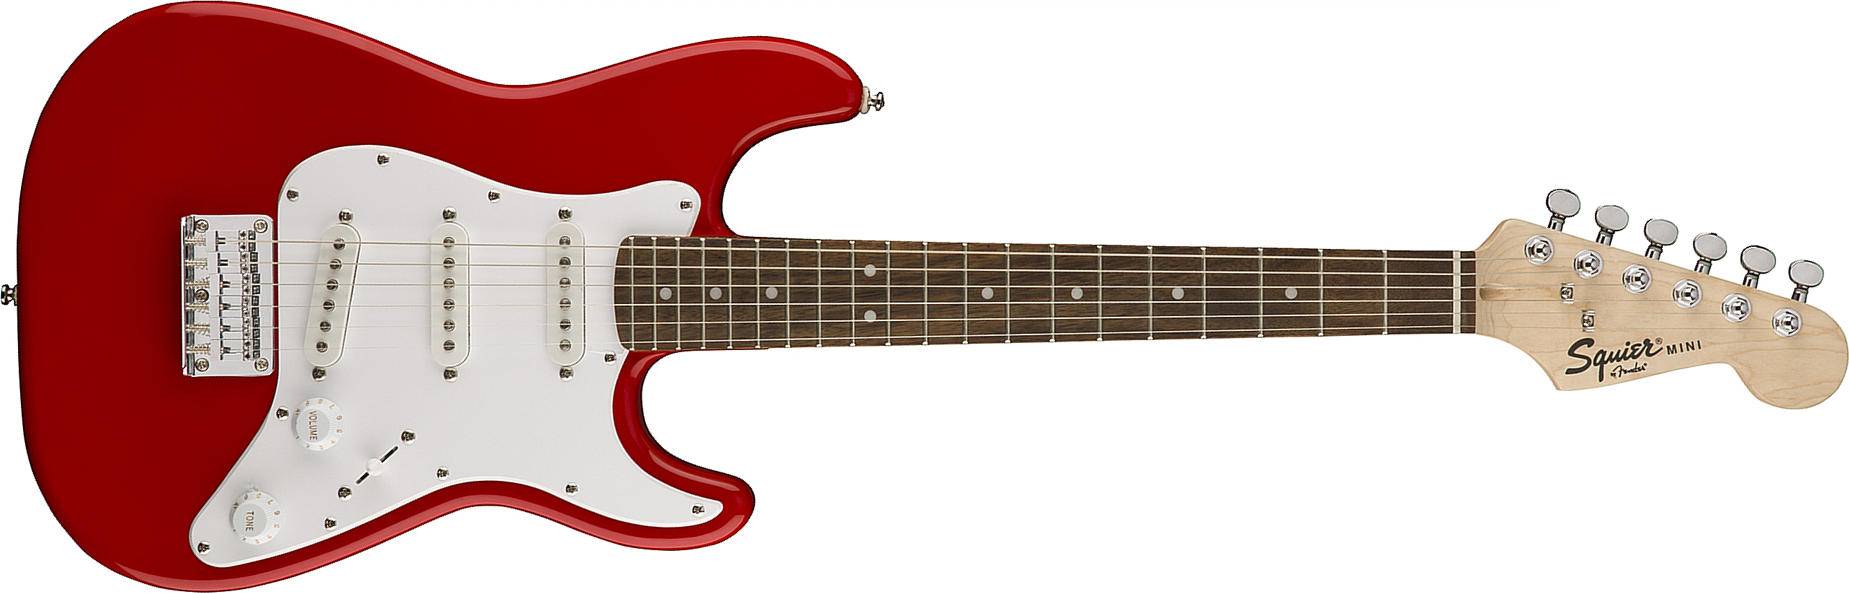 Squier Squier Mini Strat V2 Ht Sss Lau - Torino Red - Electric guitar for kids - Main picture